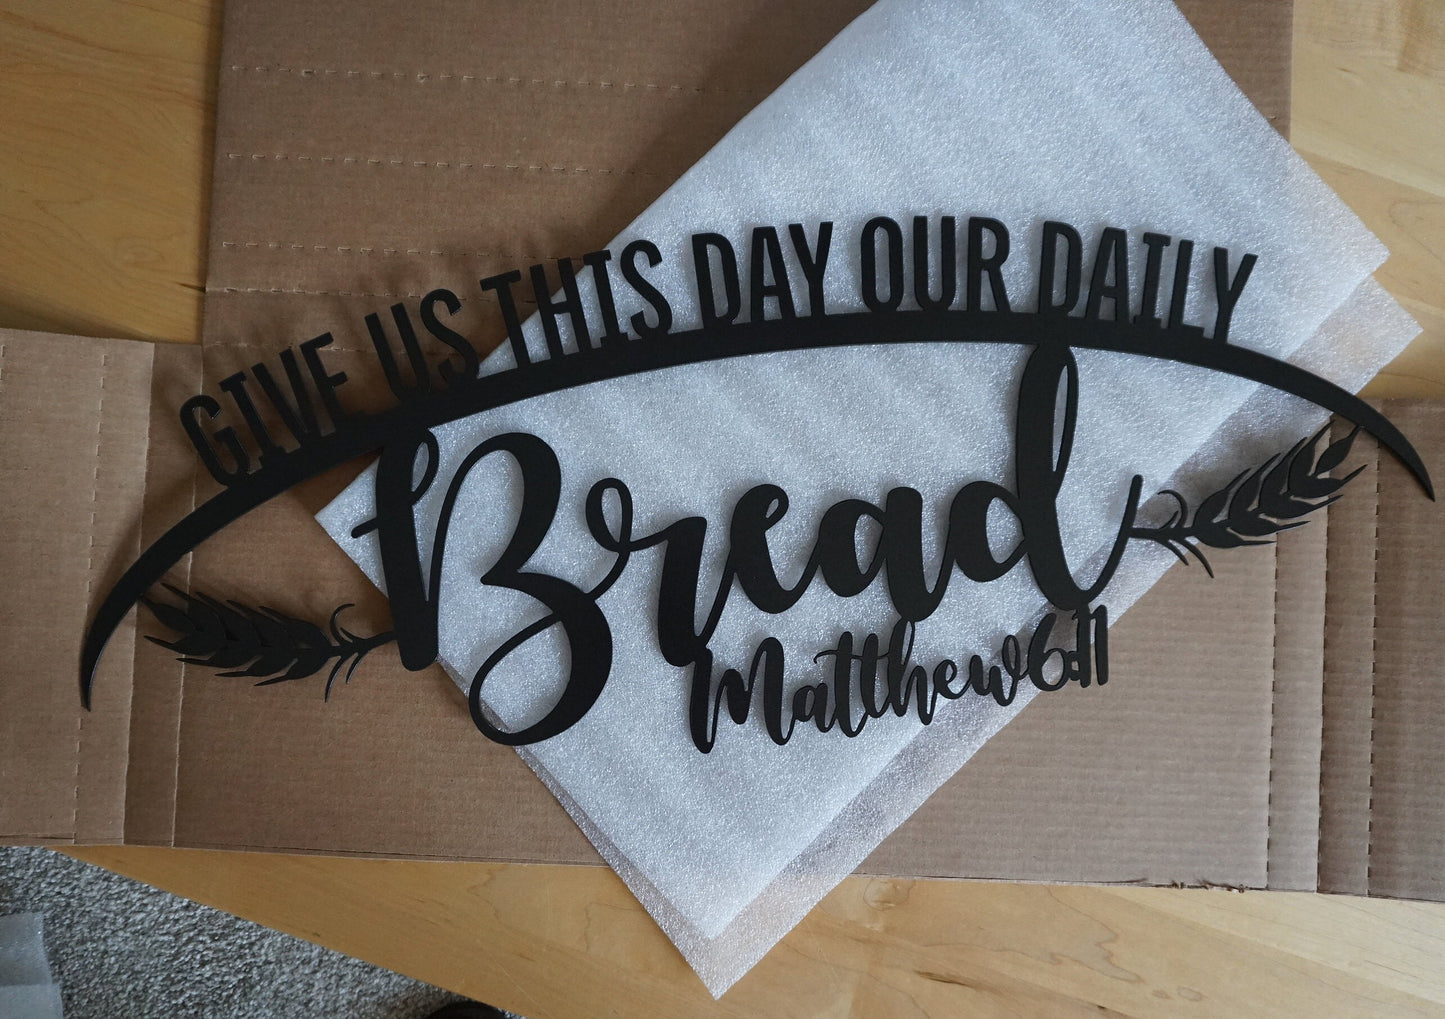 Give Us This Day Our Daily Bread | The Lord's Prayer Metal Scripture Wall Hanging